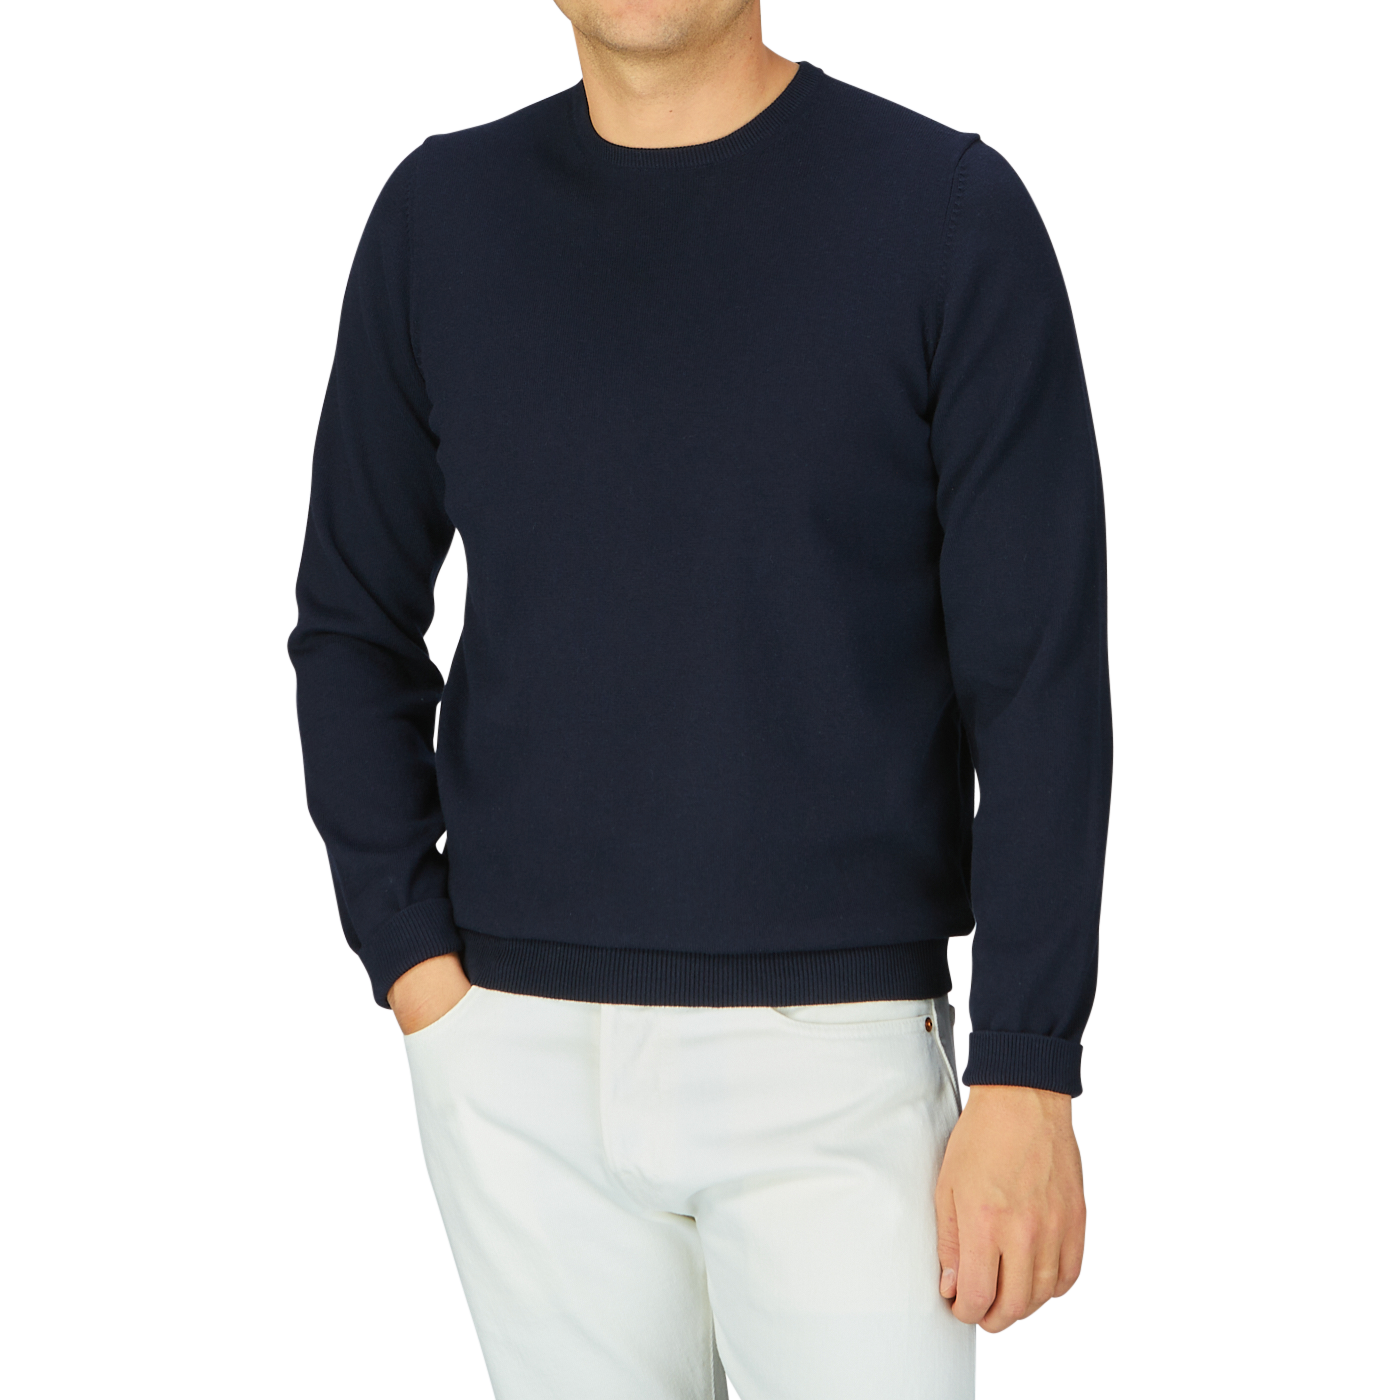 Man wearing an Alan Paine Navy Blue Luxury Cotton Crewneck sweater and white pants against a gray background.